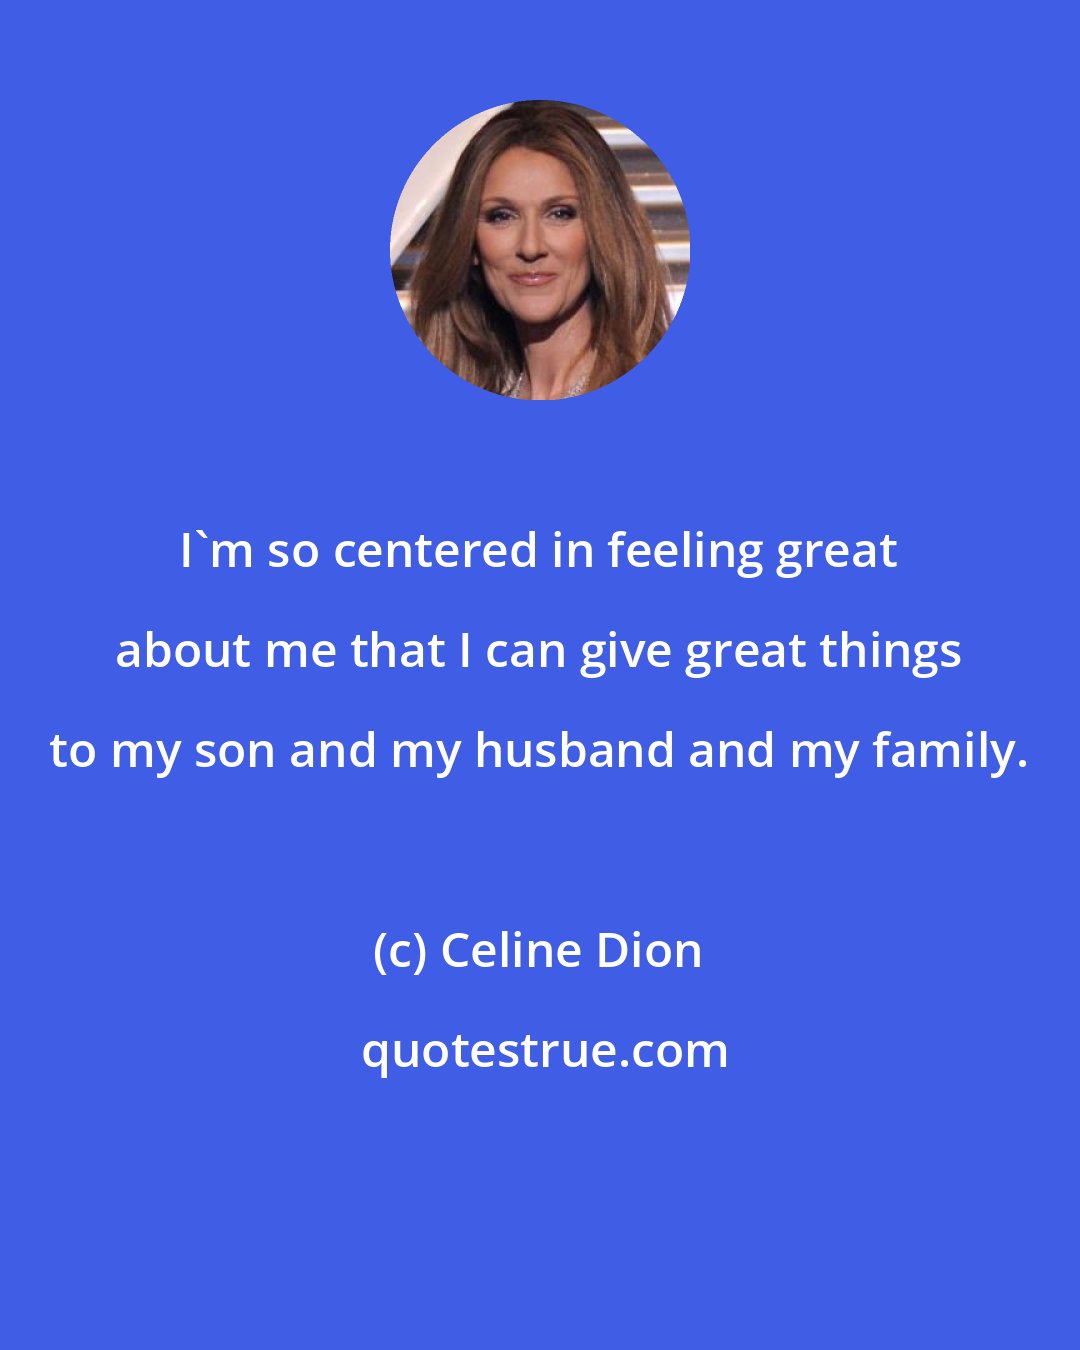 Celine Dion: I'm so centered in feeling great about me that I can give great things to my son and my husband and my family.